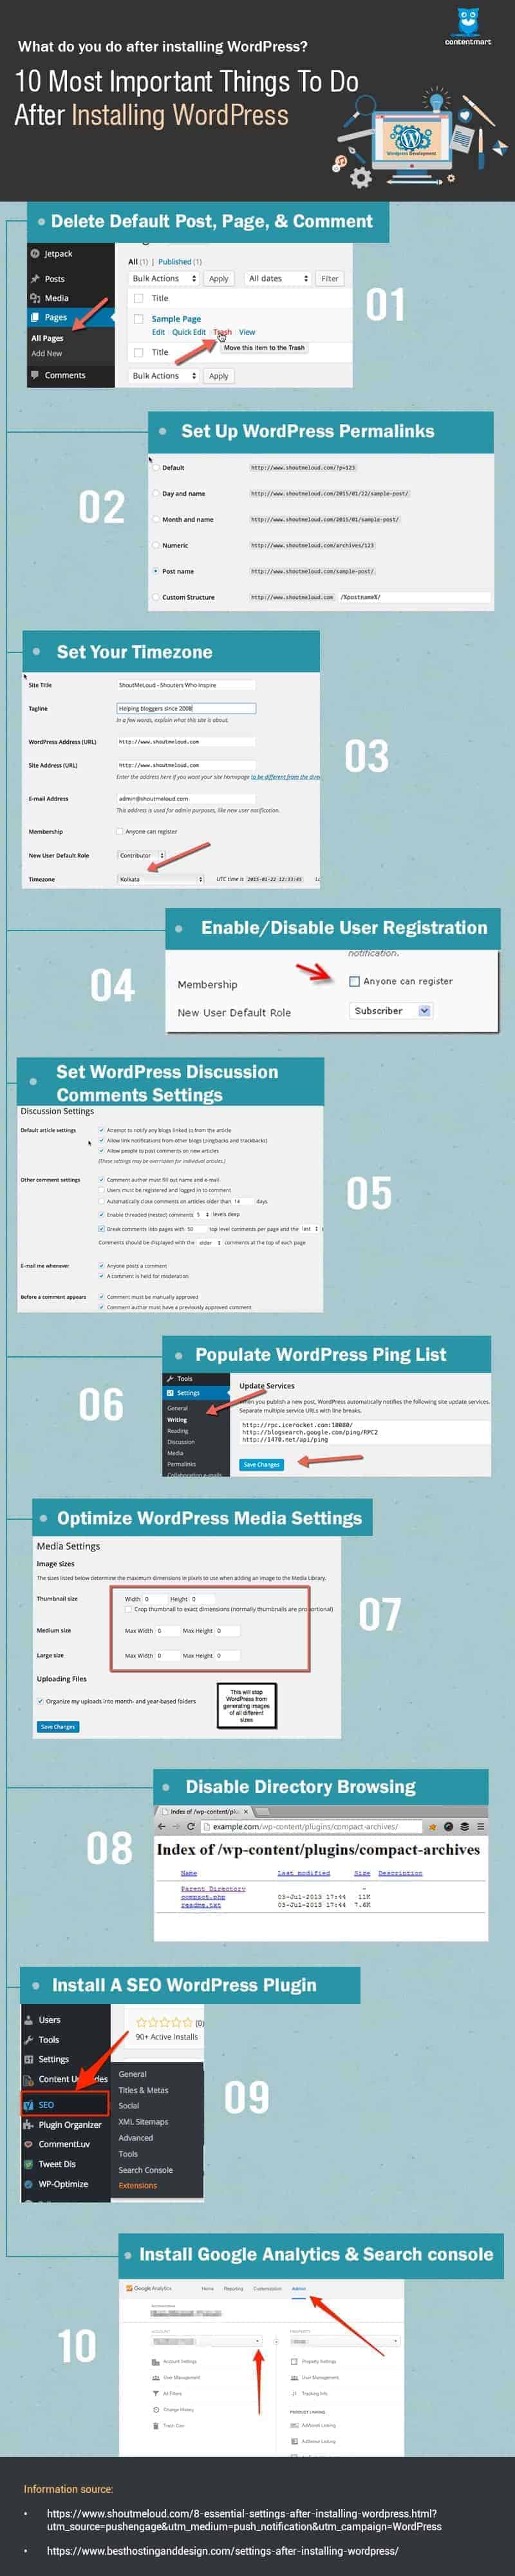 10 Most Important Things To Do After Installing WordPress 